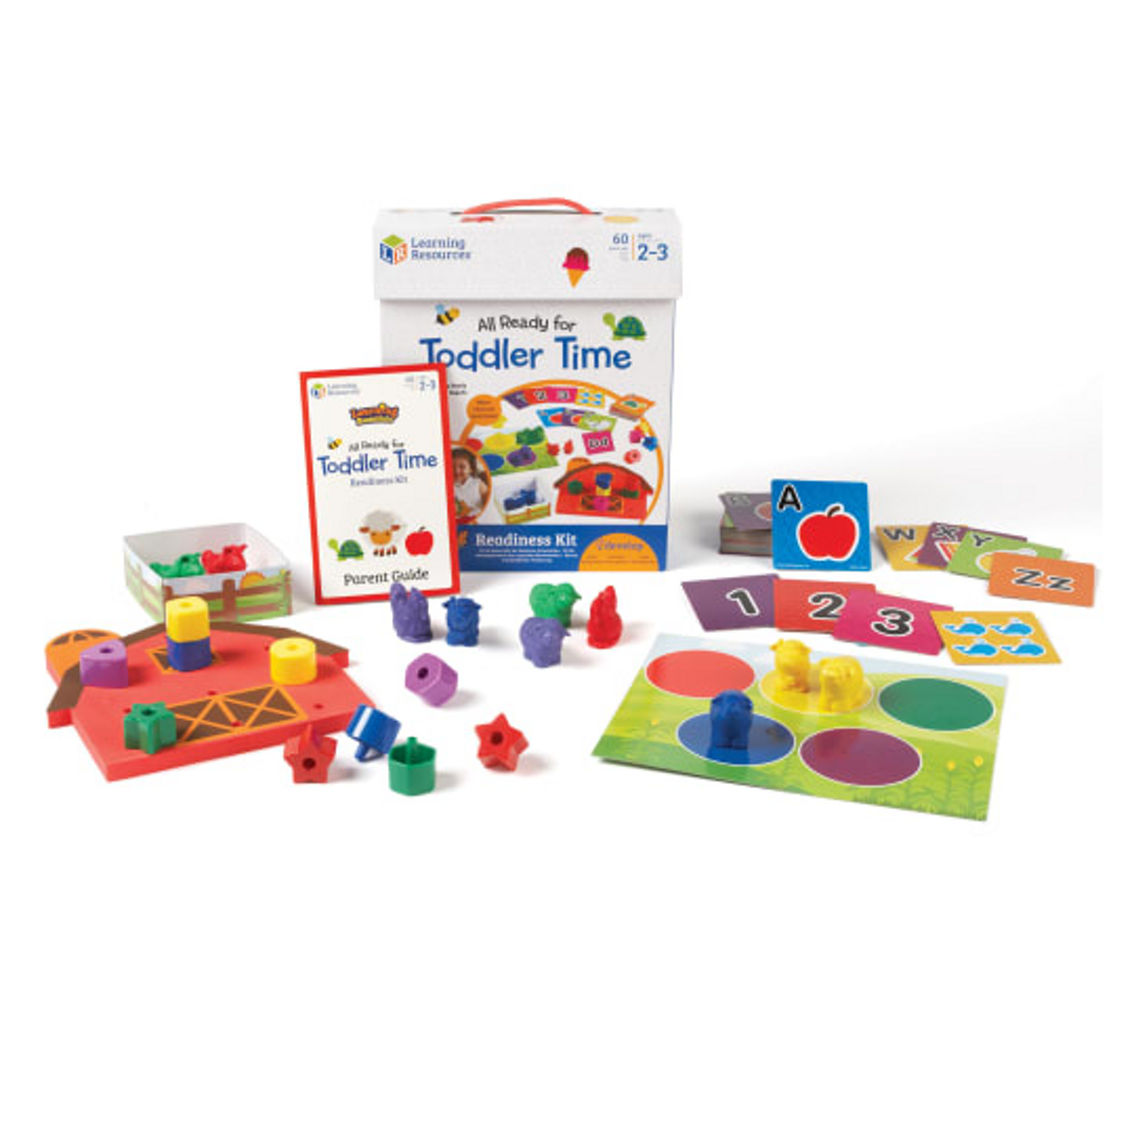 Learning Resources Learning Essentials - All Ready for Toddler Time Readiness Kit - Image 2 of 5